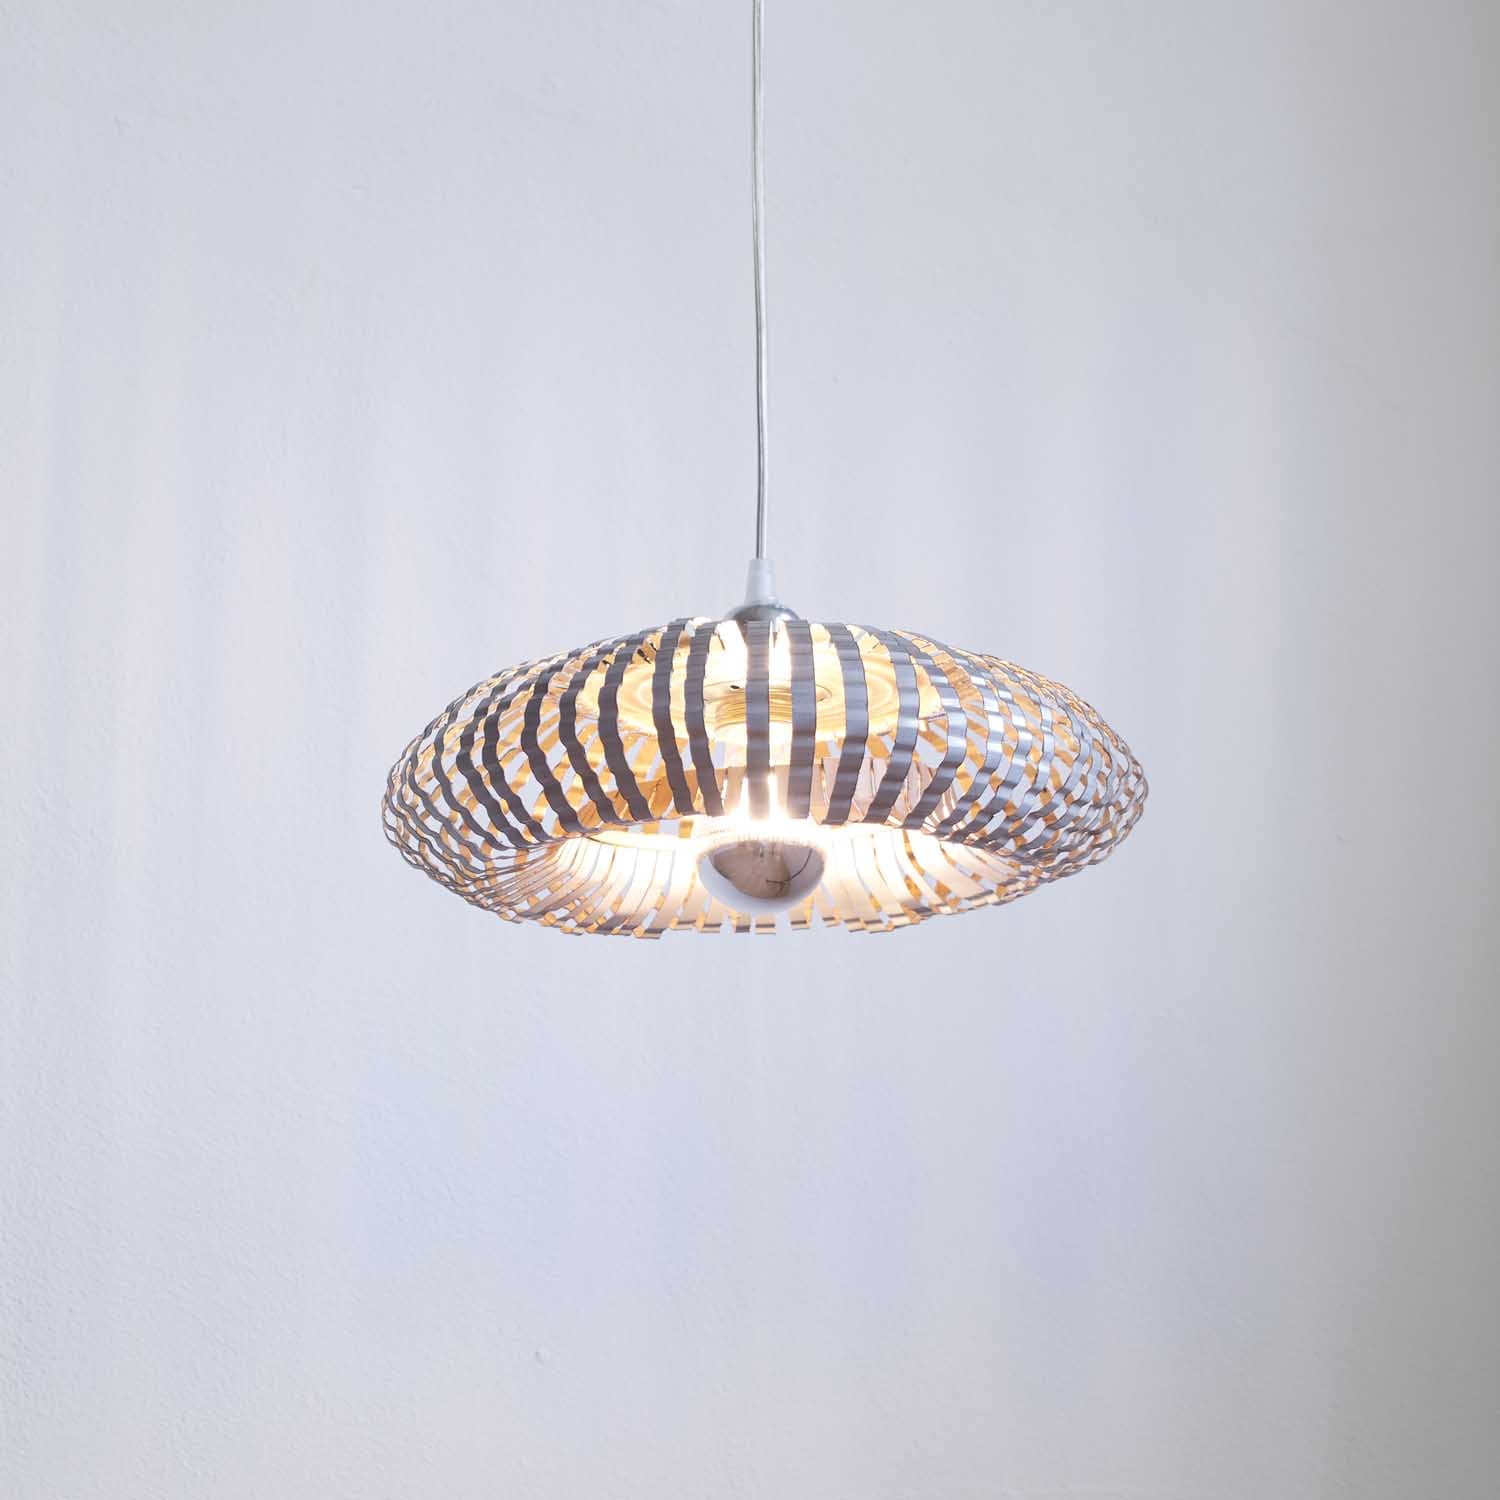 upcycled lamp, recycled ceiling light, sustainable lighting, barby ceiling light by Nadia Galli Zugaro